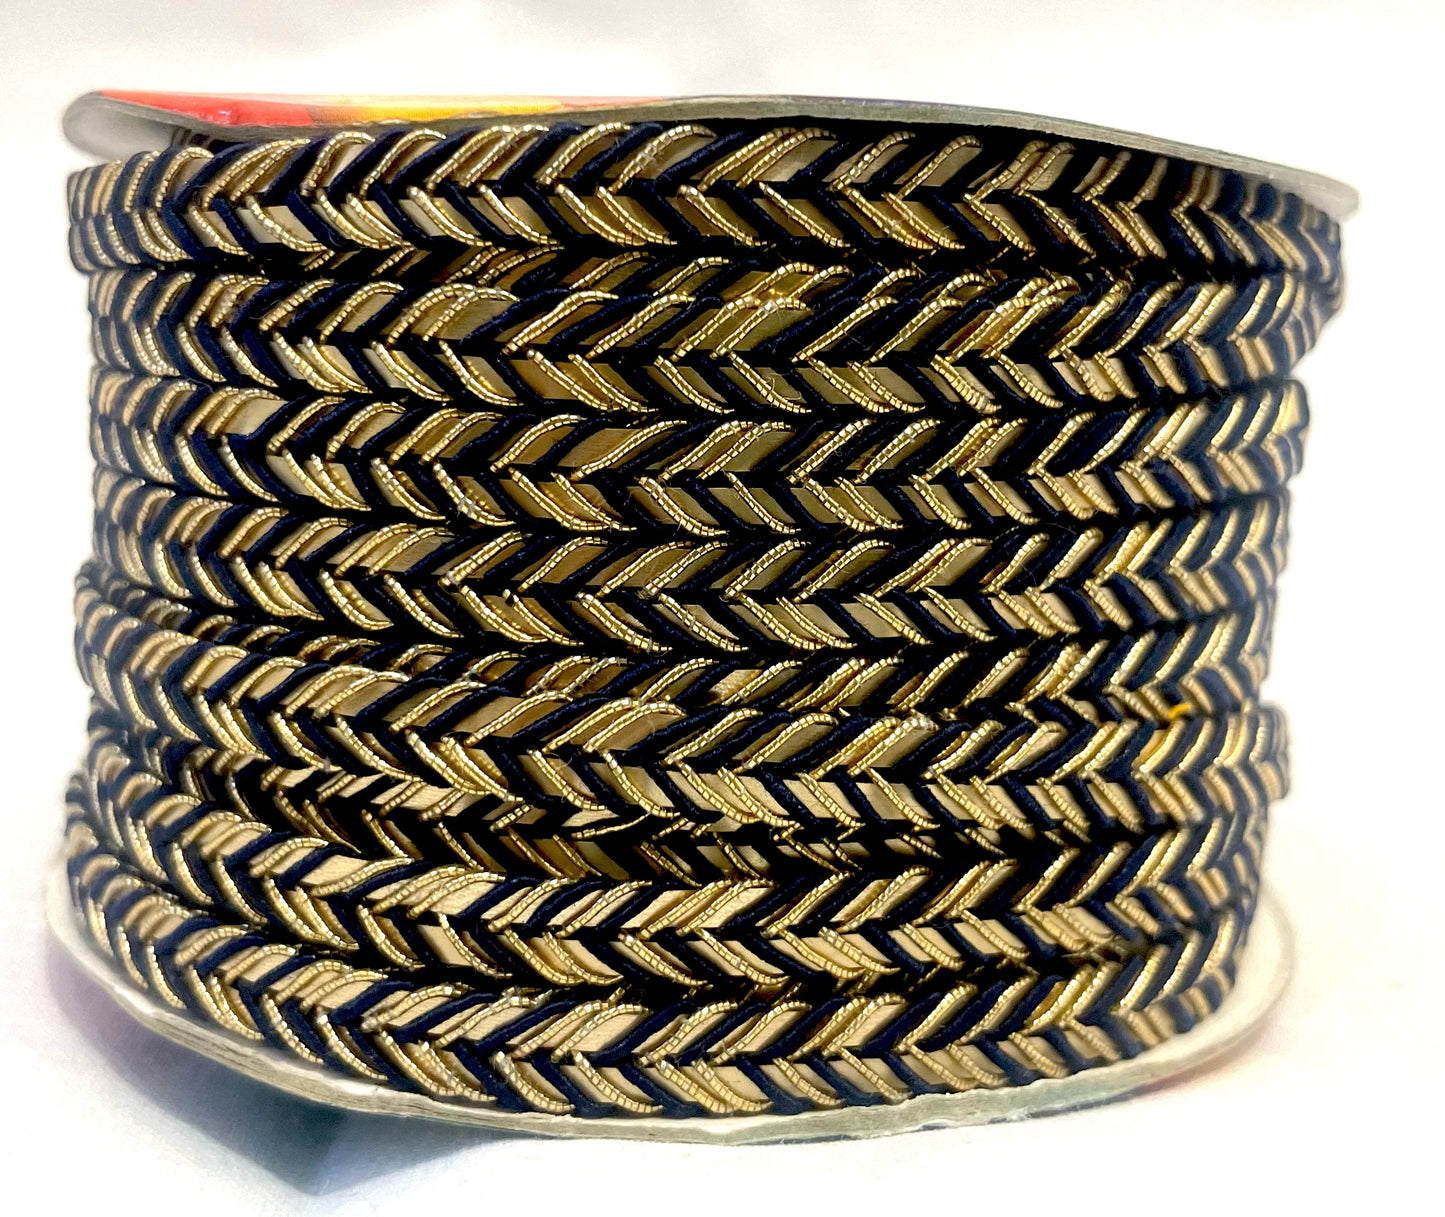 Golden Braid Border, Black And Golden,  Laces for Dress, Home Décor, Shoe, Bags, Hats, DIY, Handmade, 0.2 inch Broad